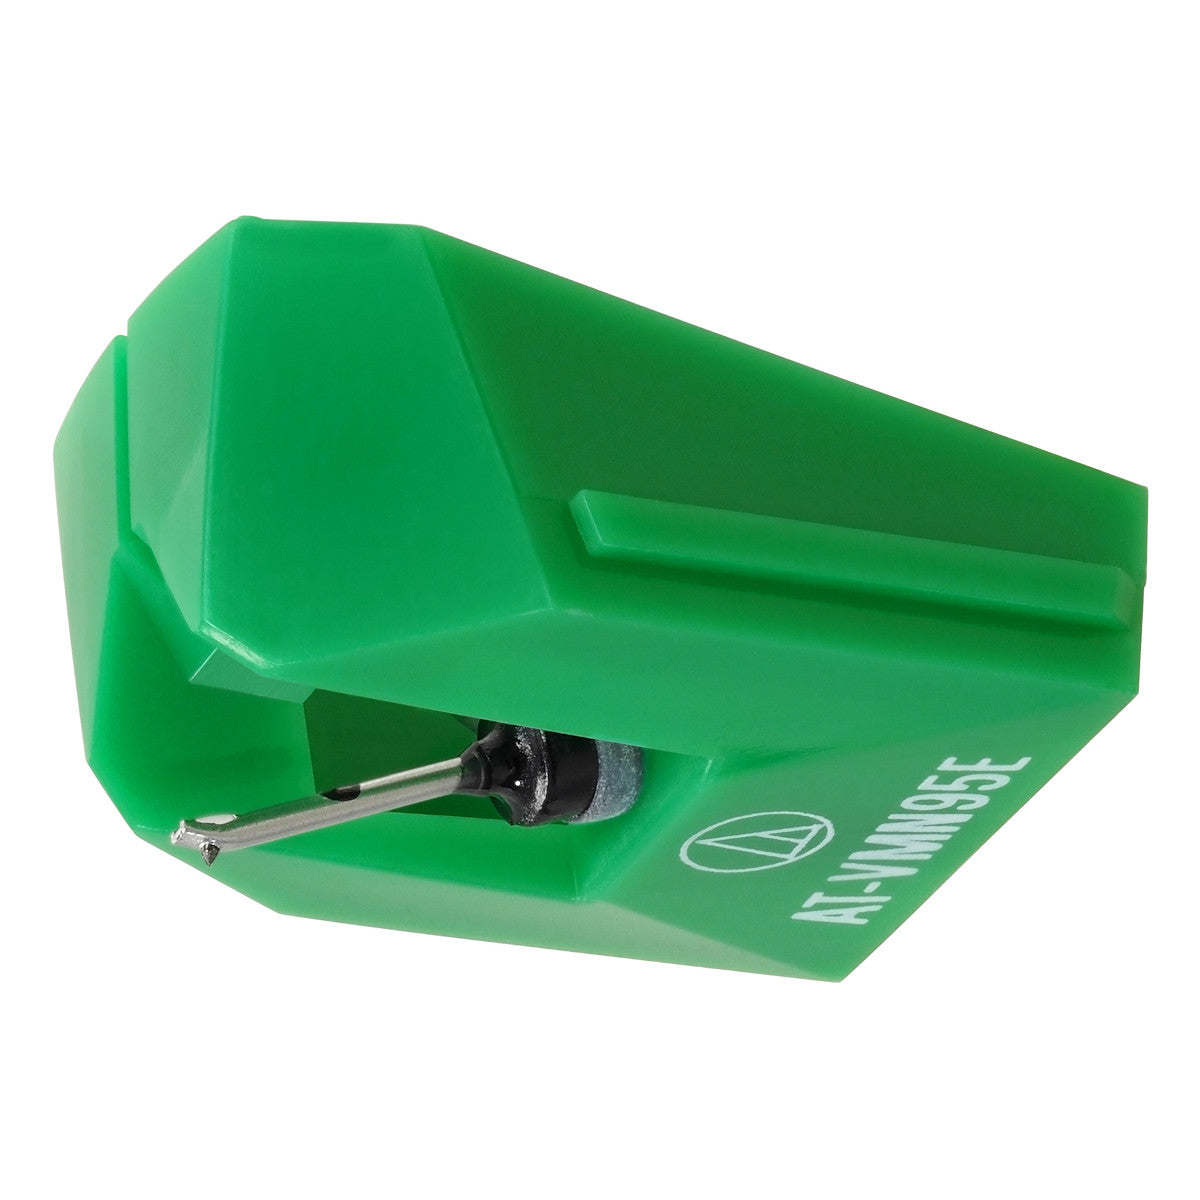 AudioTechnica AT-VMN95EBK Replacement Stylus for AT-VM95E (Green)